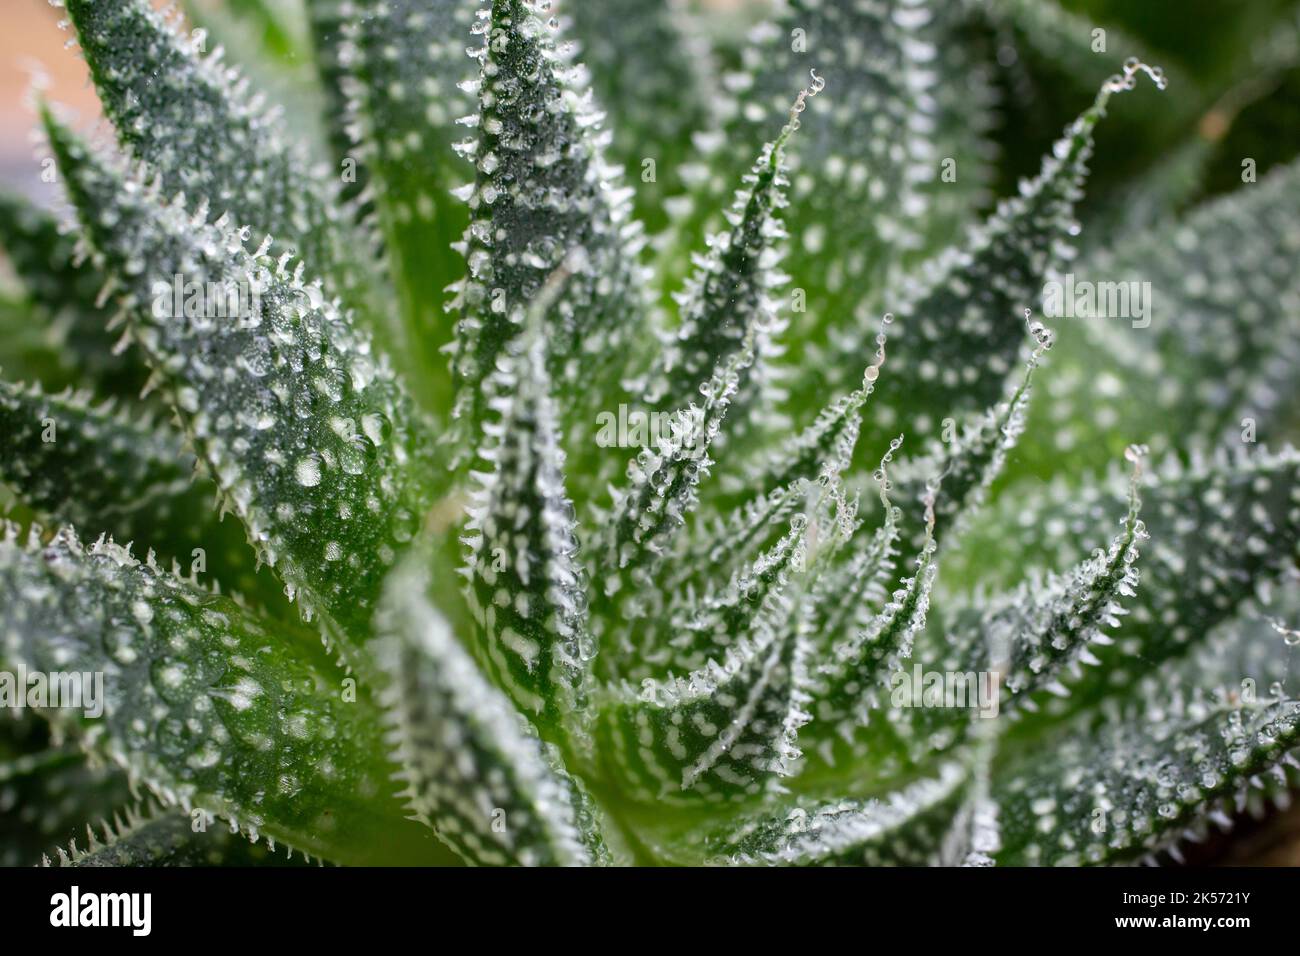 Aloe plant close up with water droplets, soft focus macro Stock Photo